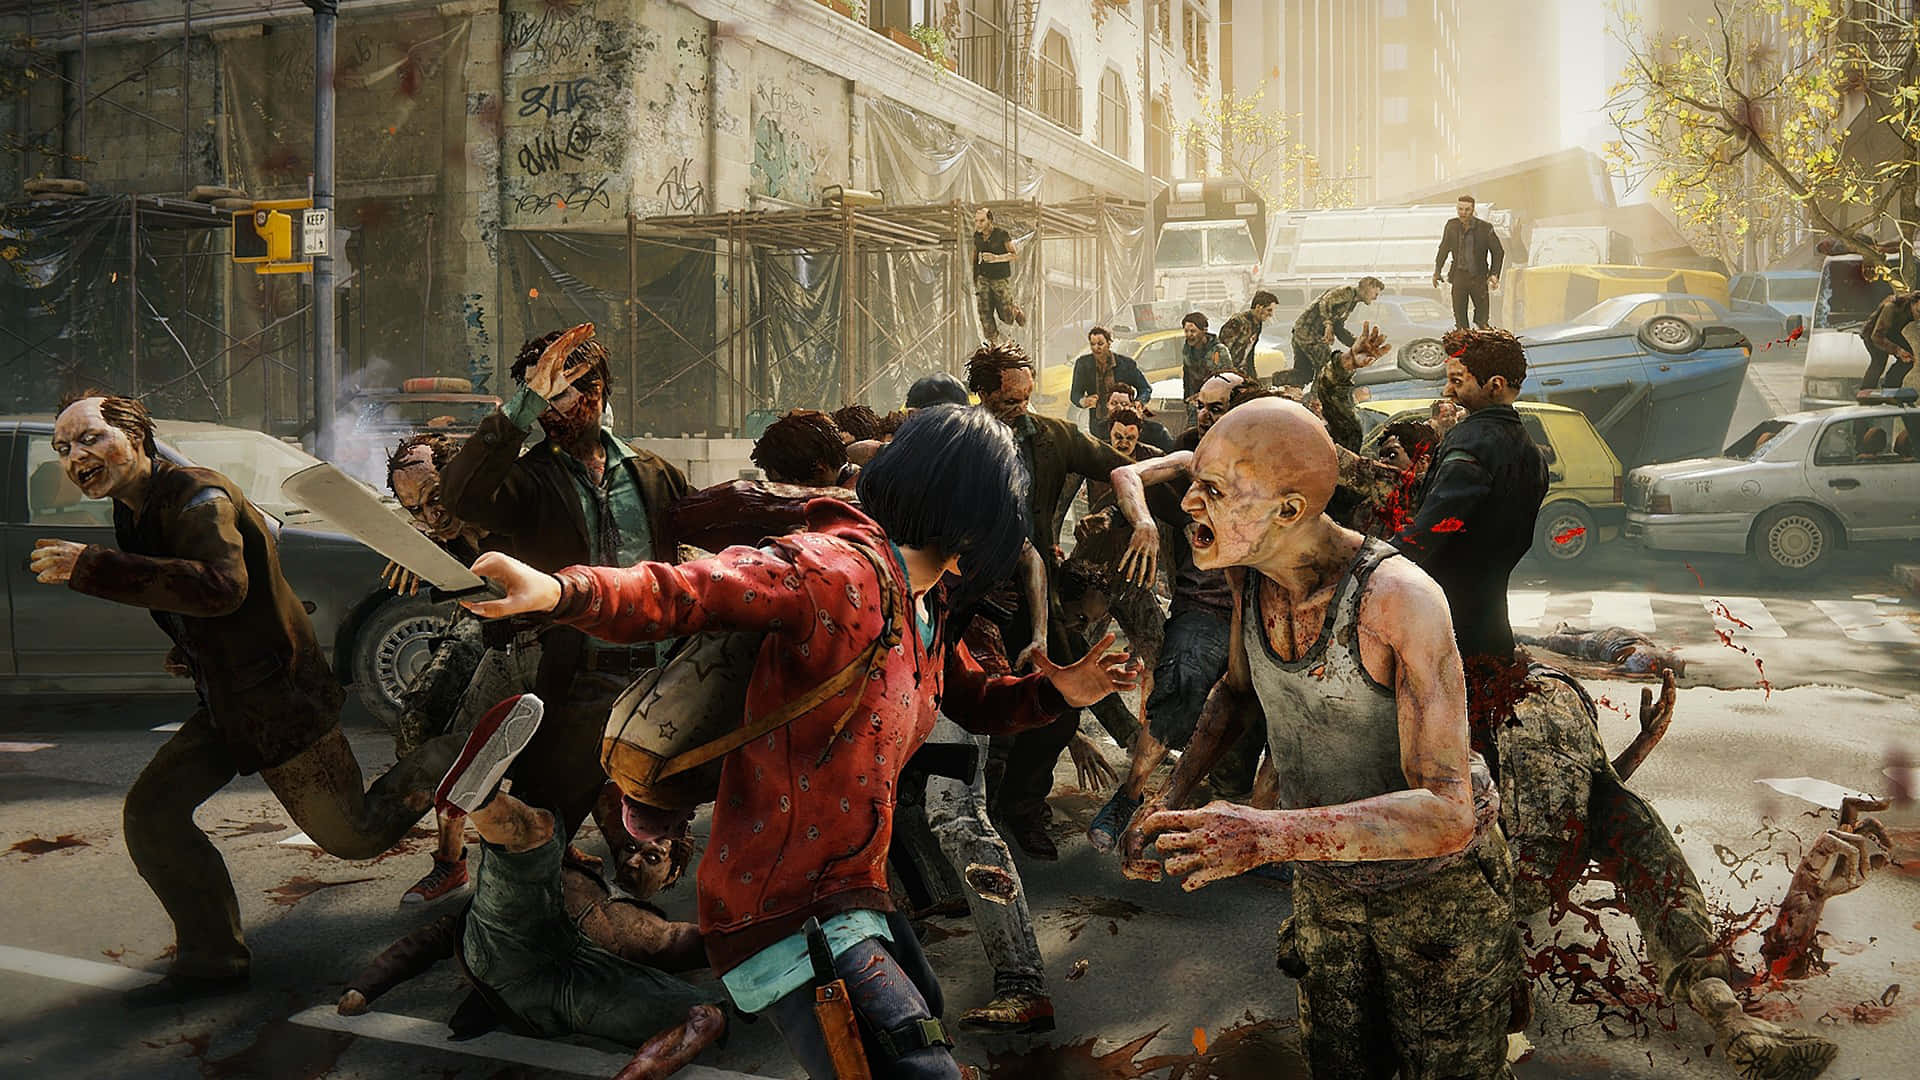 A group of survivors in a post apoctalyptic world.